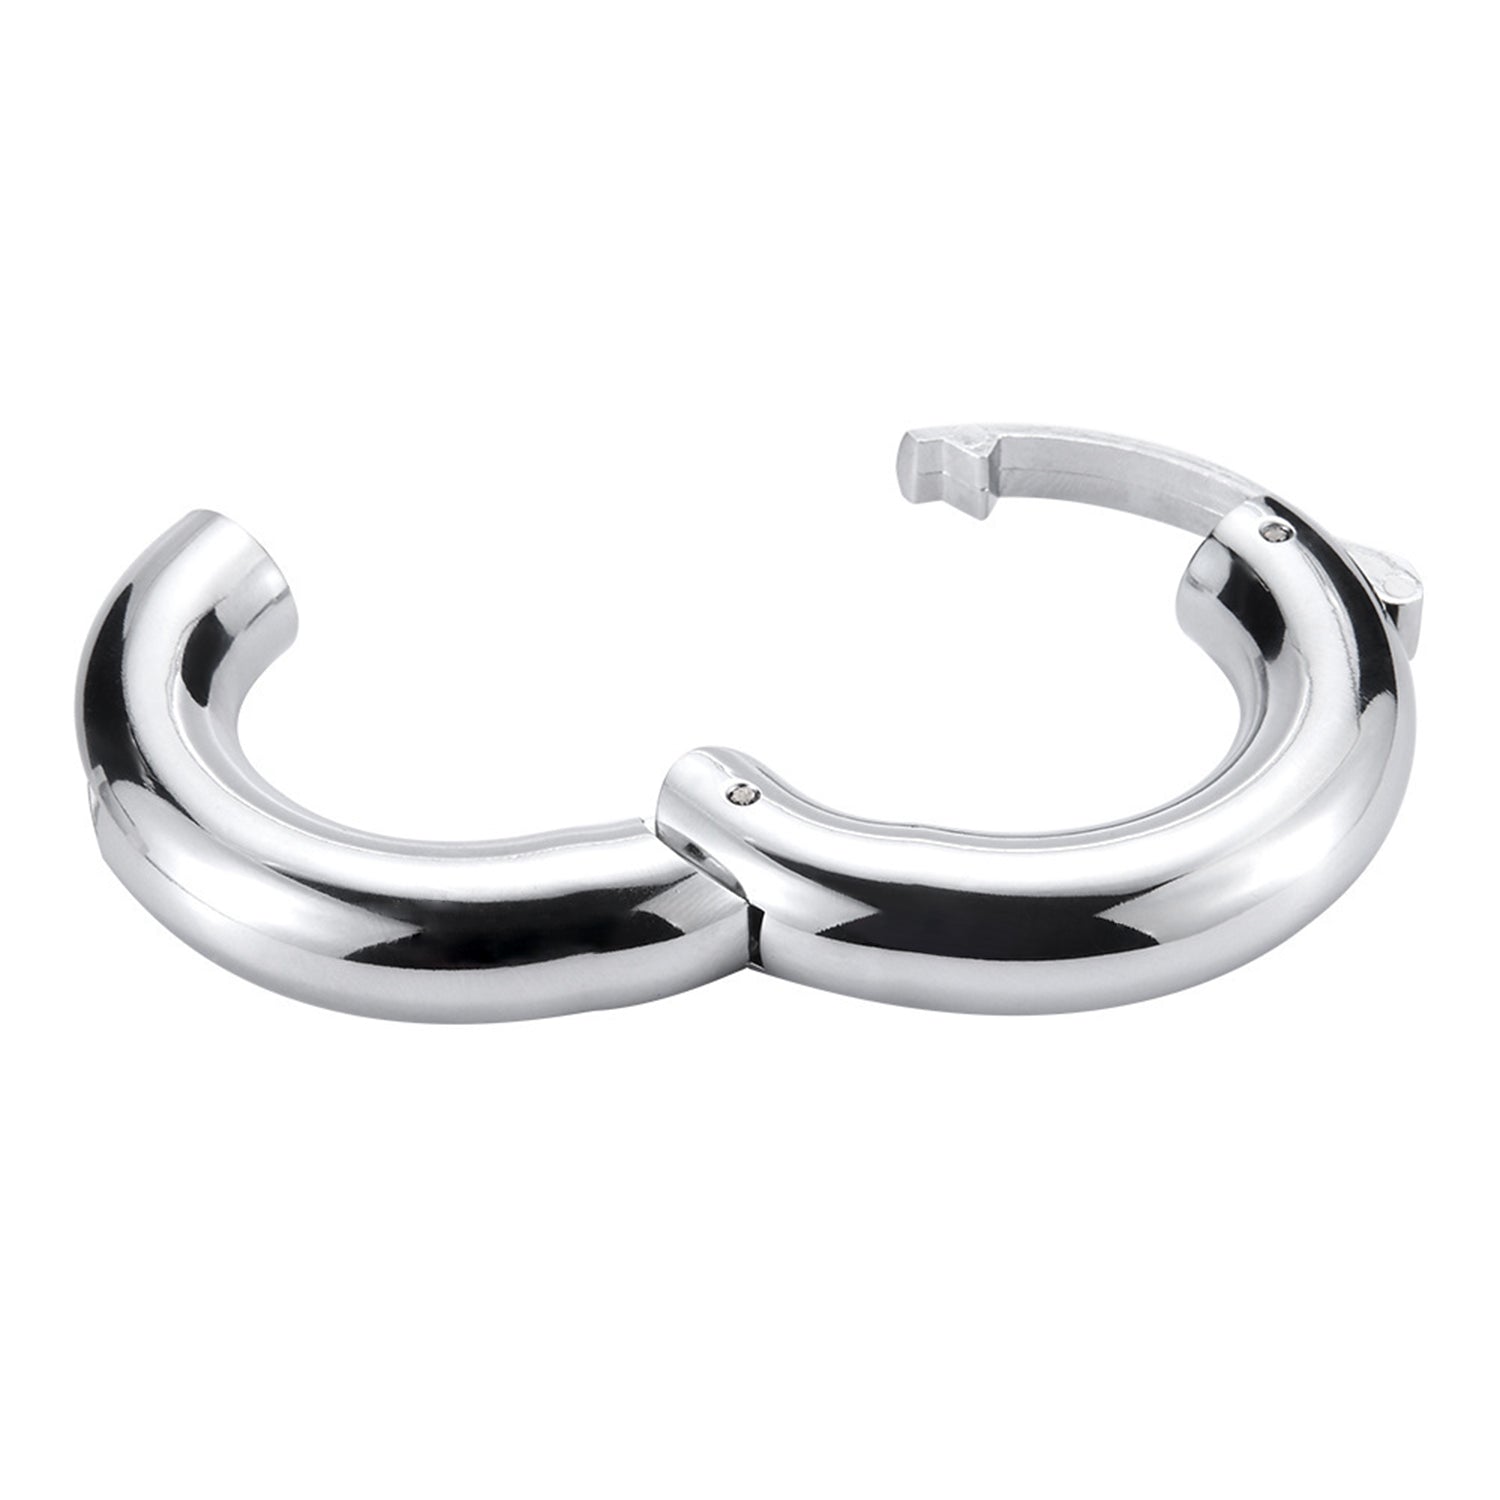 Metal locking sperm ring, adjustable weight-bearing ring, exercise delayed restraint penis ring, adult male flirting device